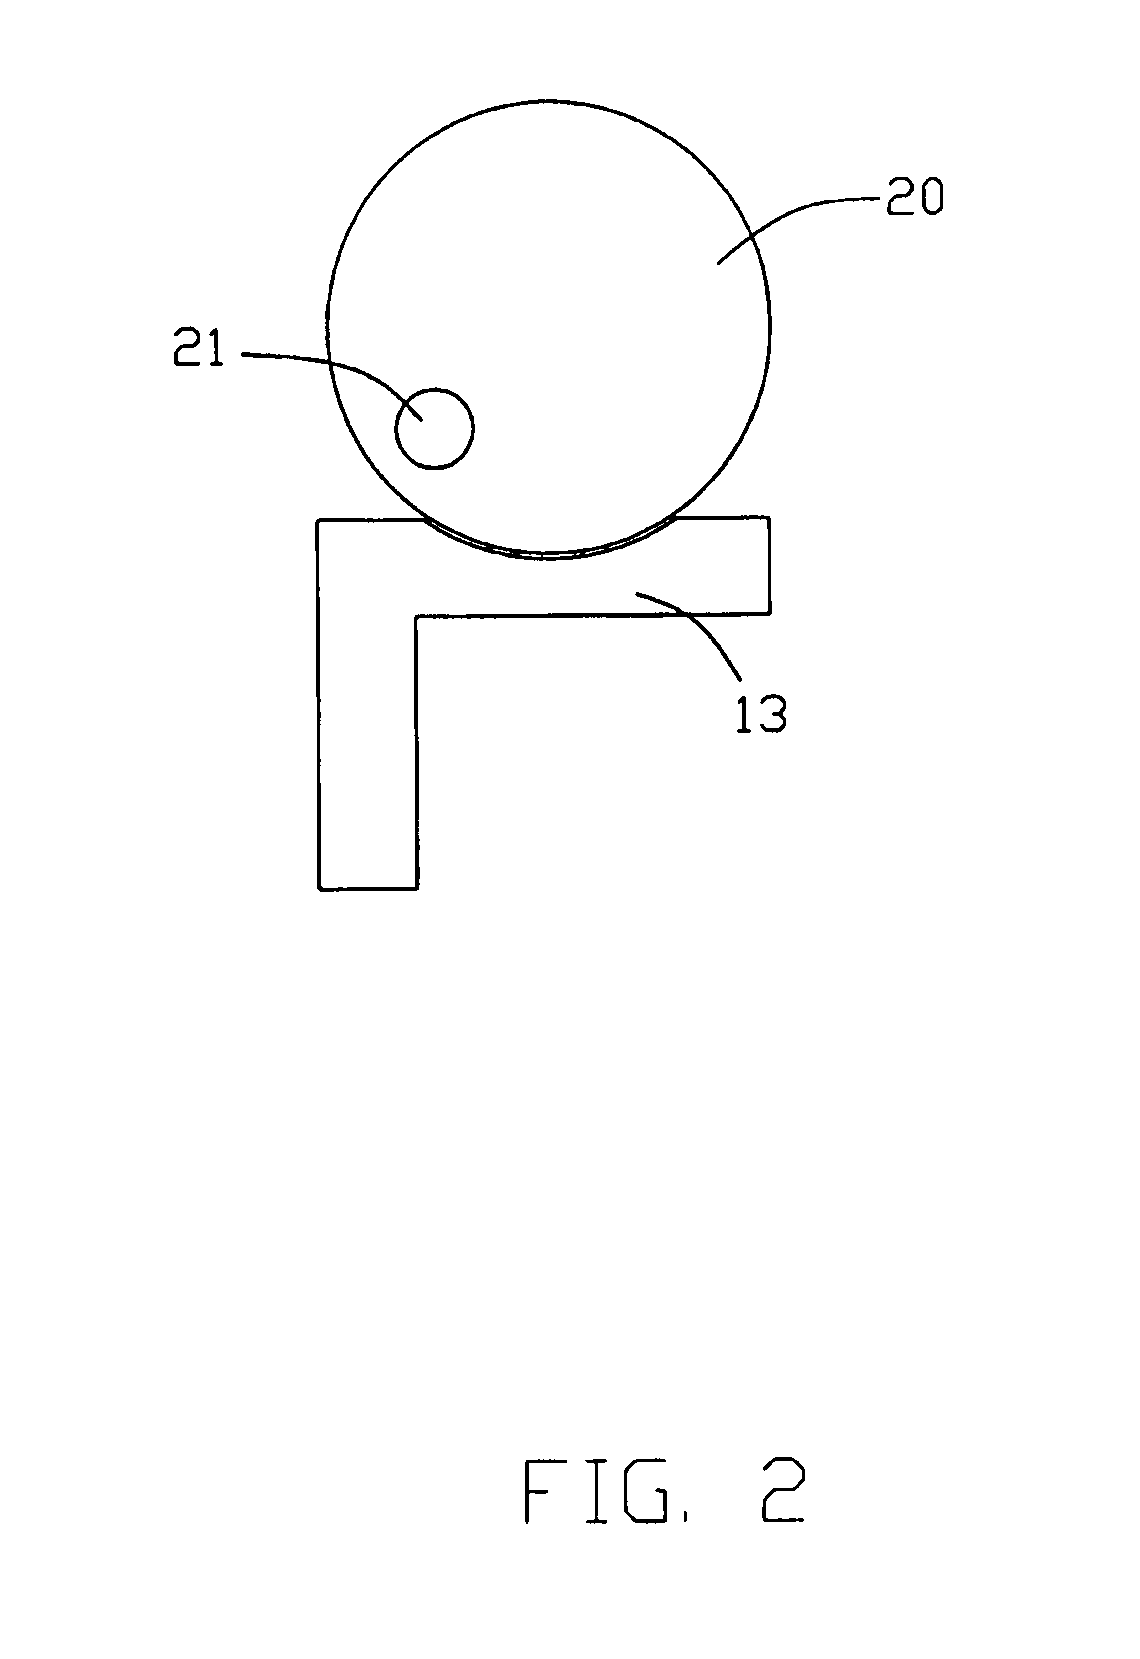 Electrical contact background of the invention